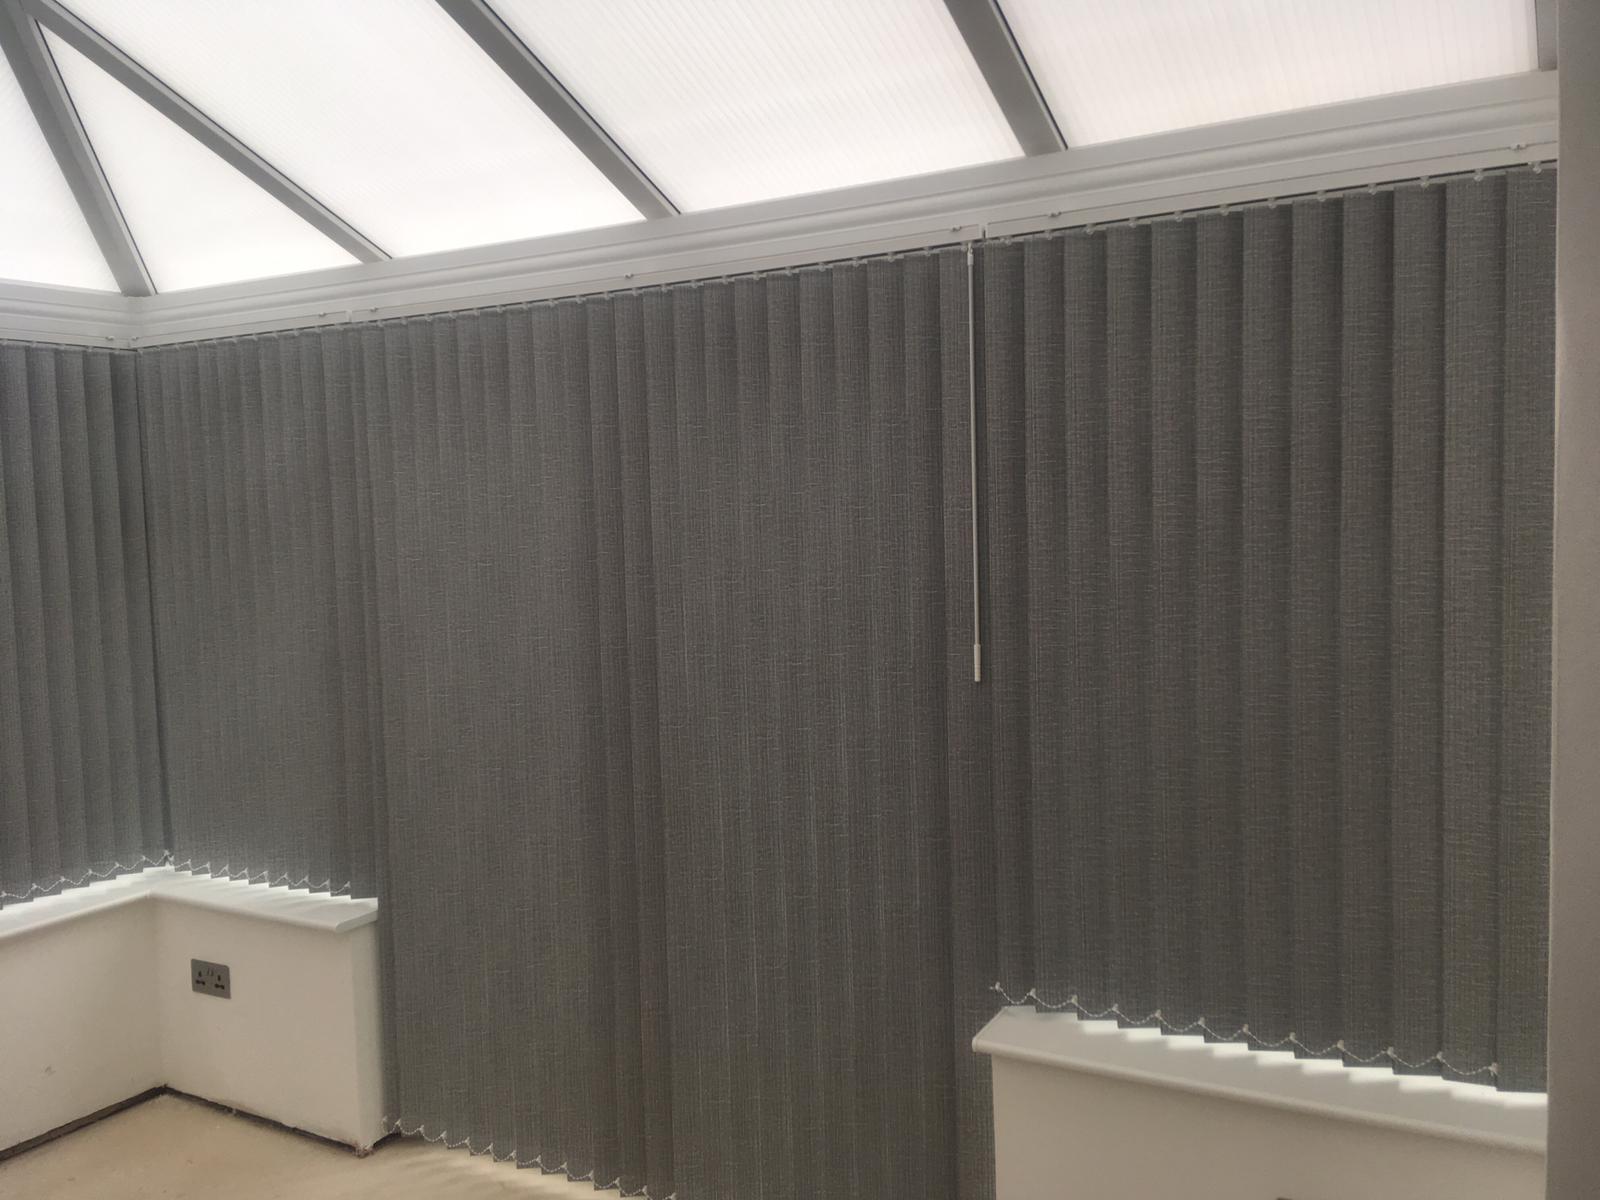 Suppliers of Pet-Friendly Vertical Blinds Options